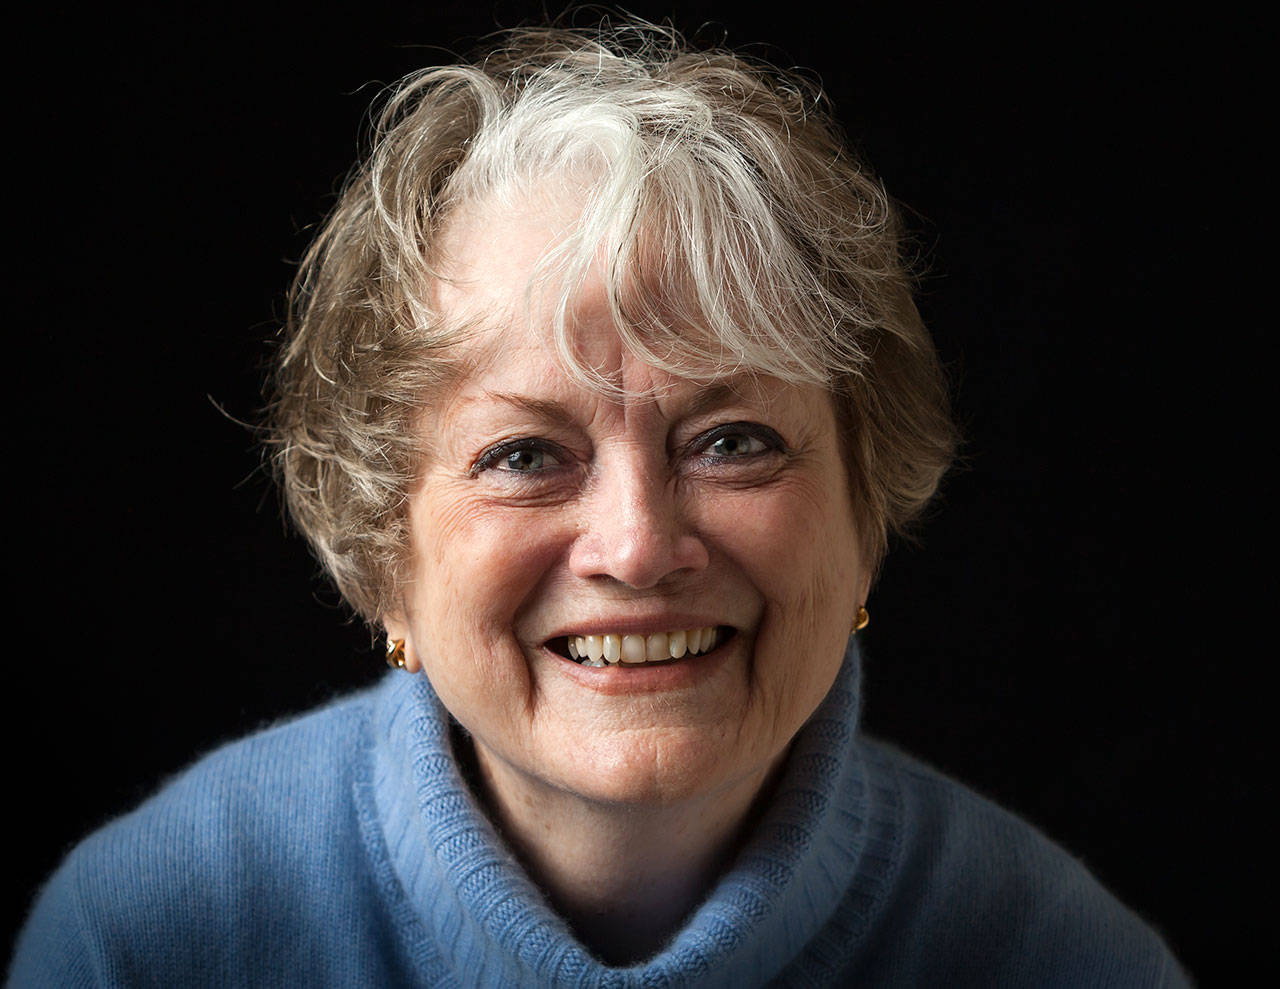 Photo courtesy of jshuimages.com — Medlock.                                Photo courtesy of jshuimages.com — Medlock has been writing her novel since 1980. She only recently published it after wanting to share her legacy.